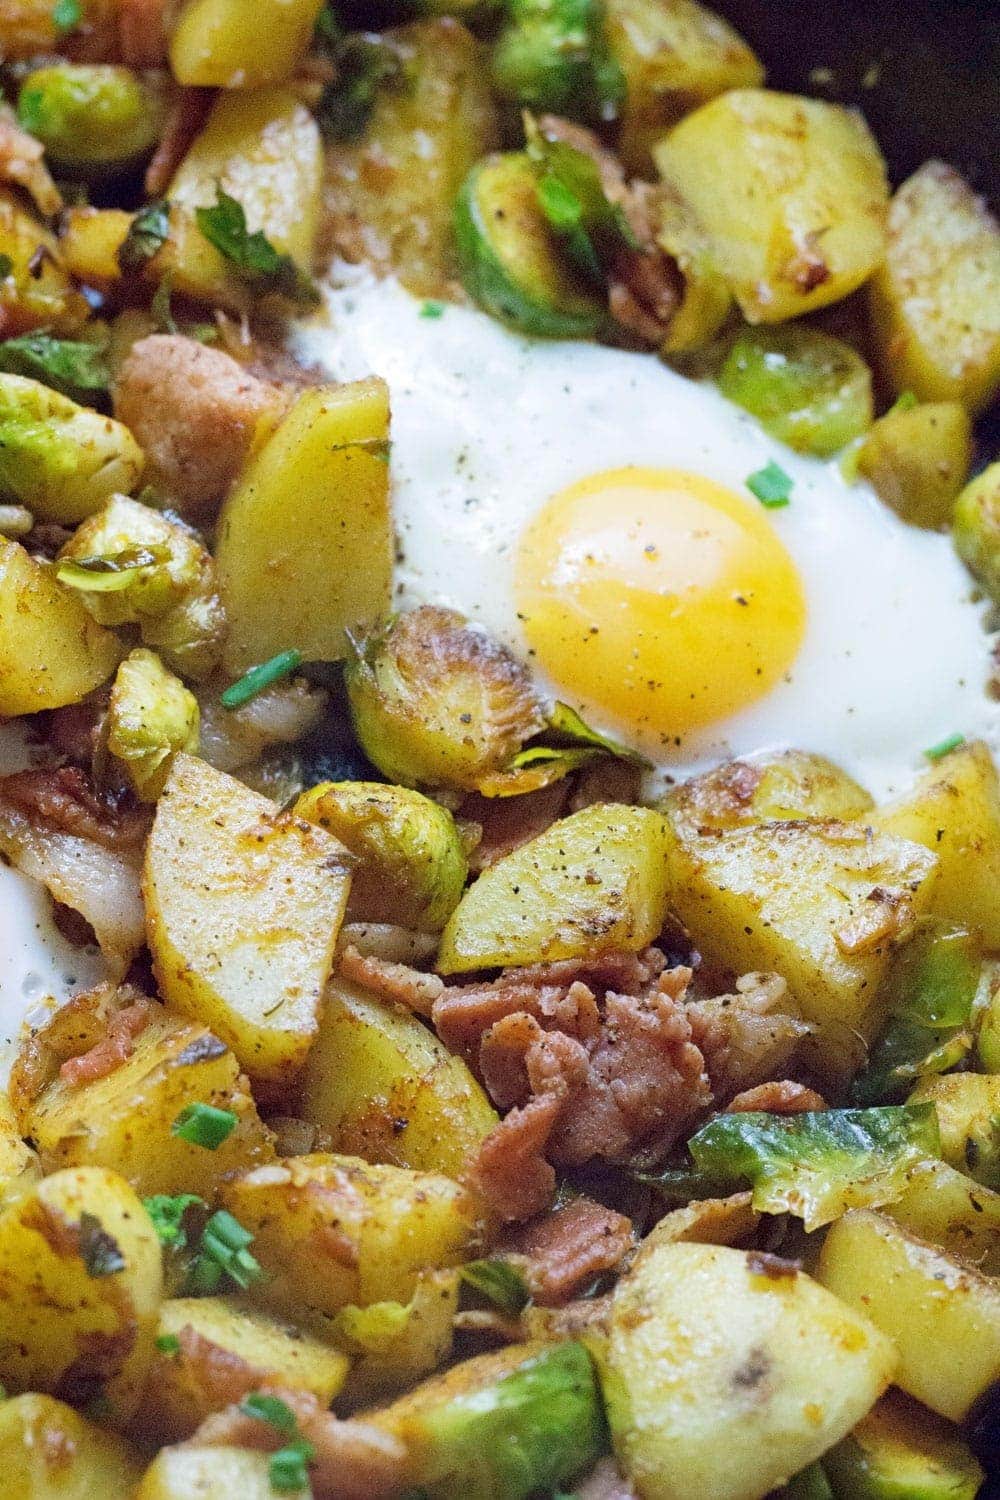 This Brussels sprout, potato & bacon breakfast hash is the perfect thing to start your morning! Crack in an egg or two & you've got a tasty morning meal.